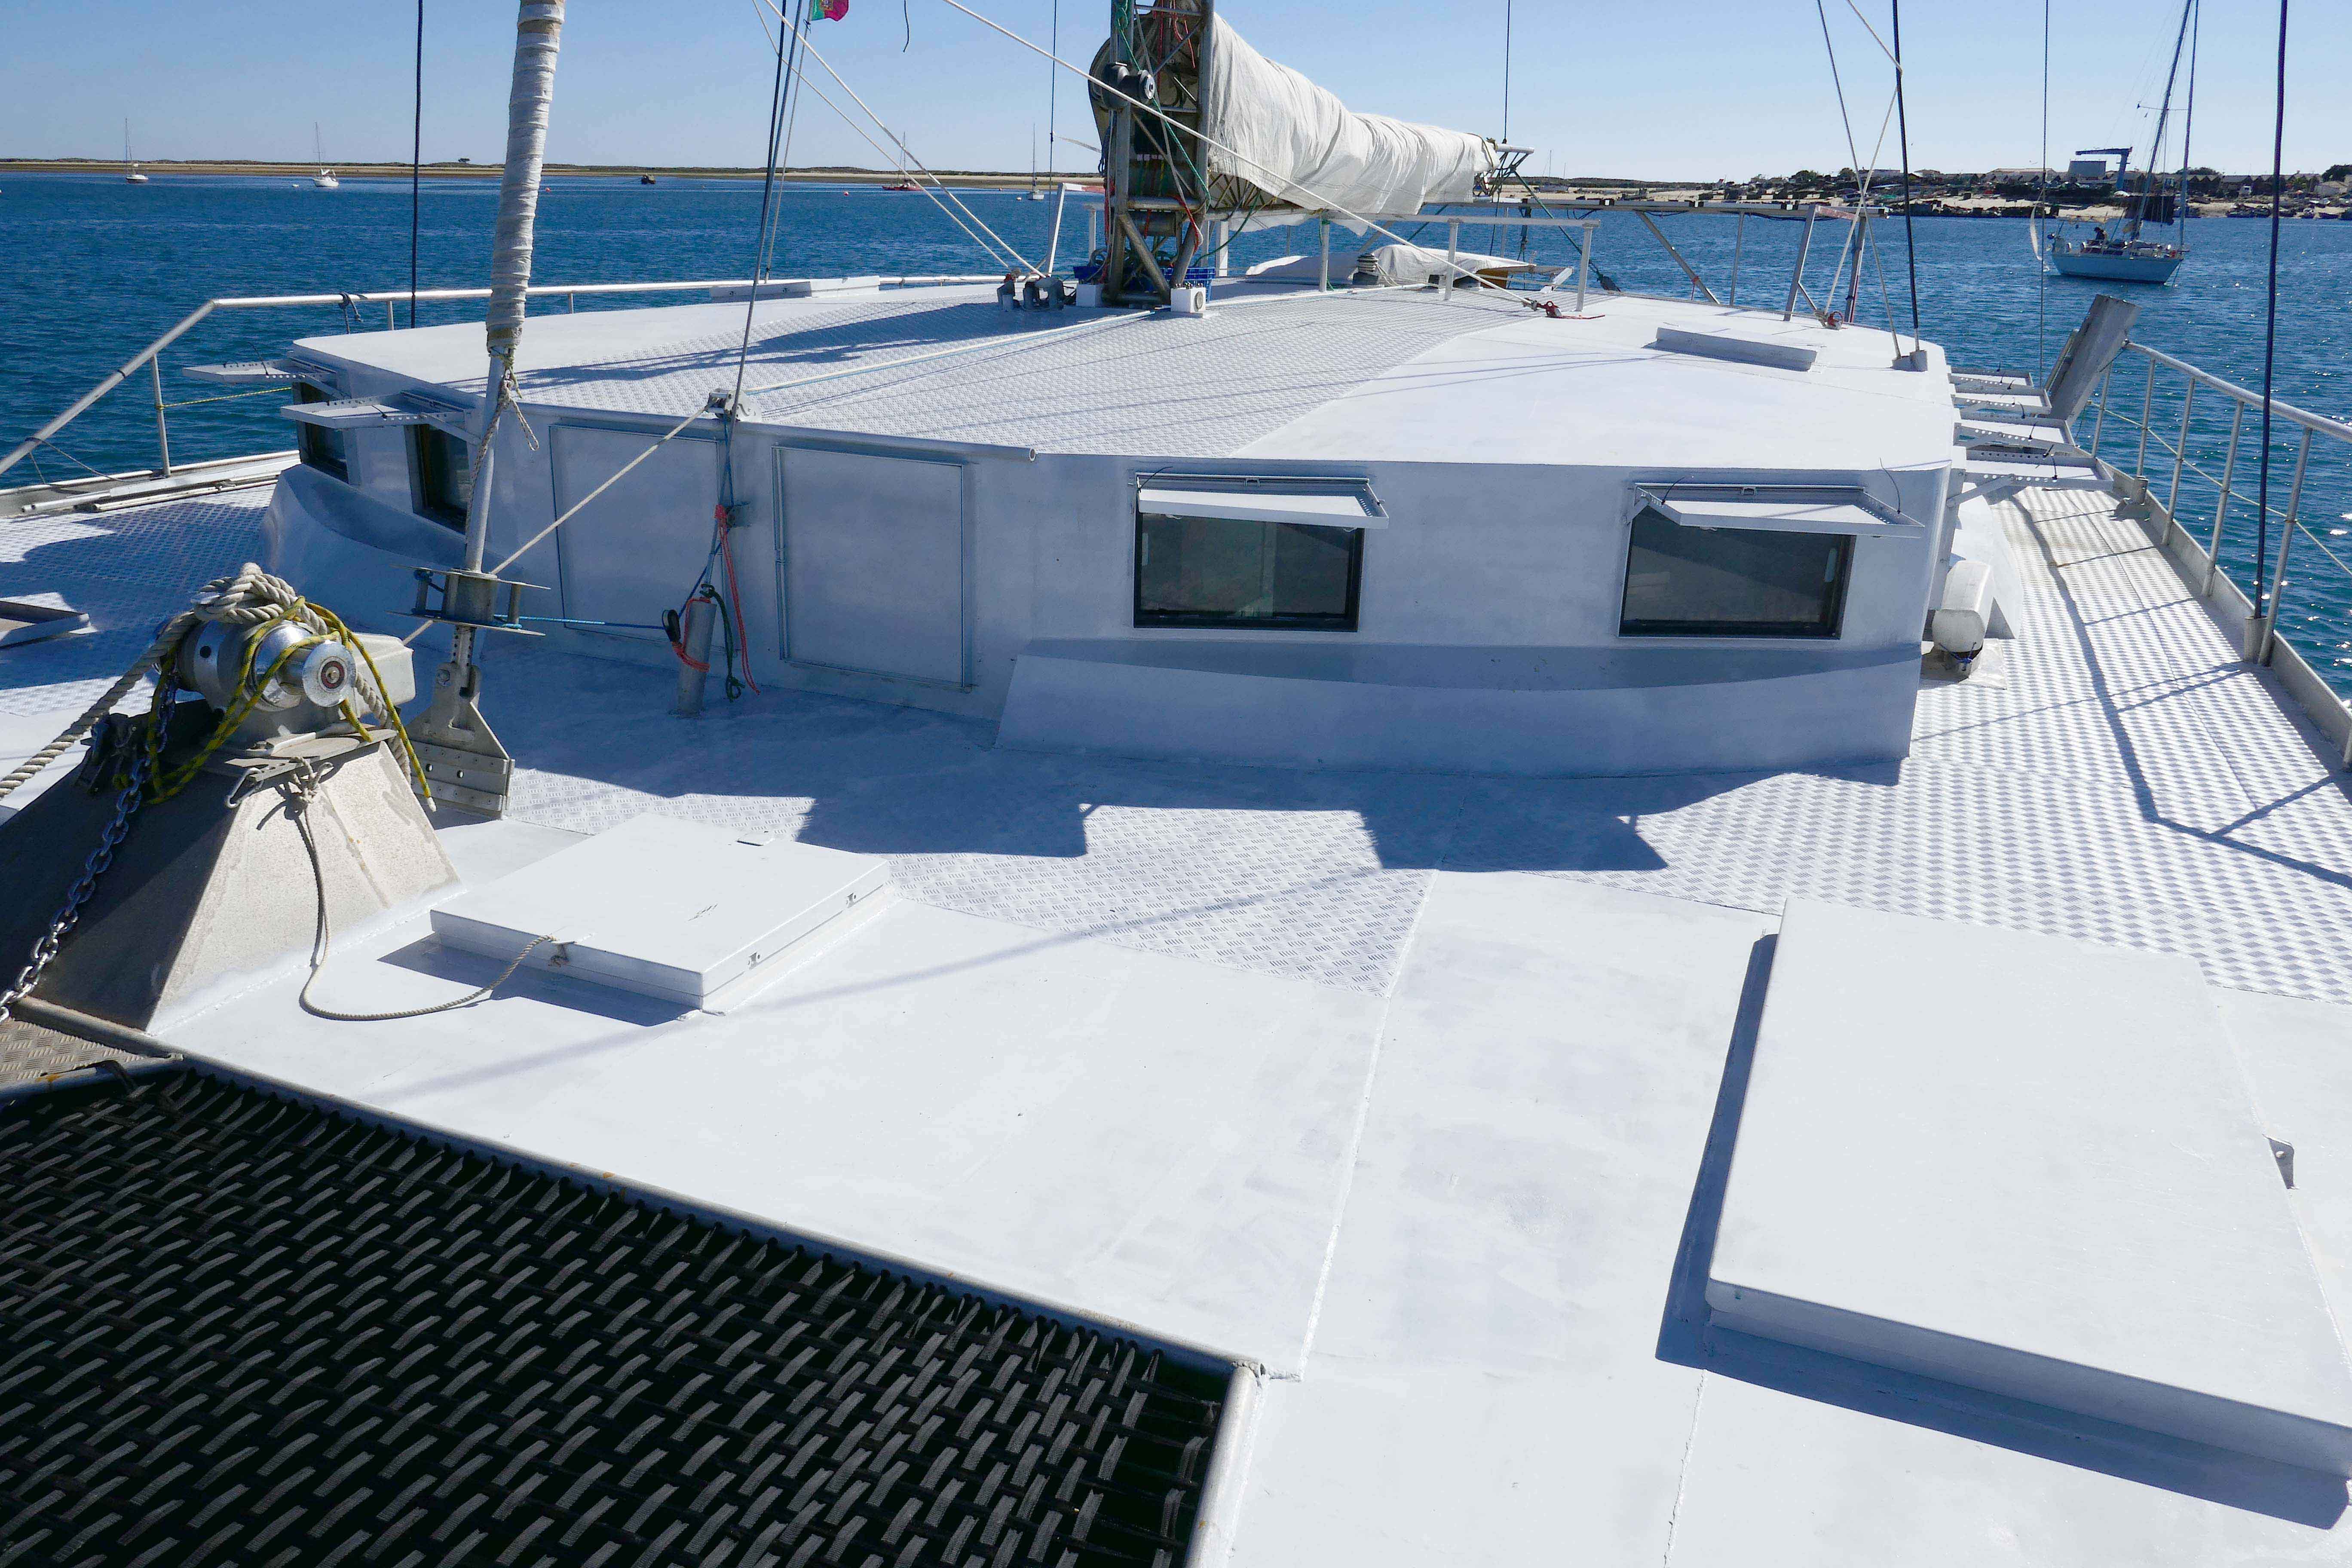 2012 Other WaveScalpel 57' Sailboat for sale in Portugal - image 6 